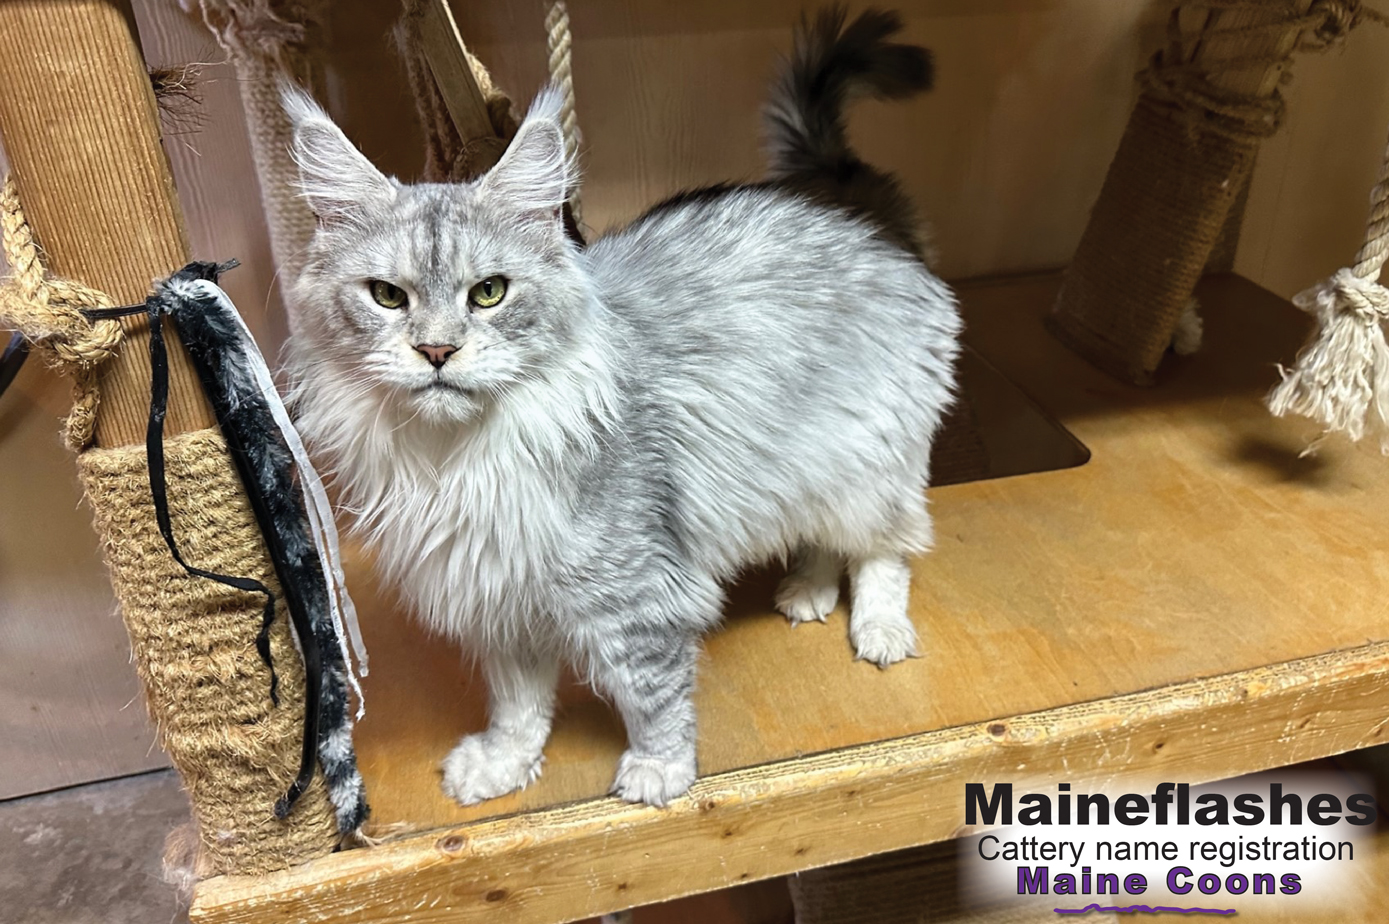 Maine Coon Cat Breeder / Maineflashes cattery name